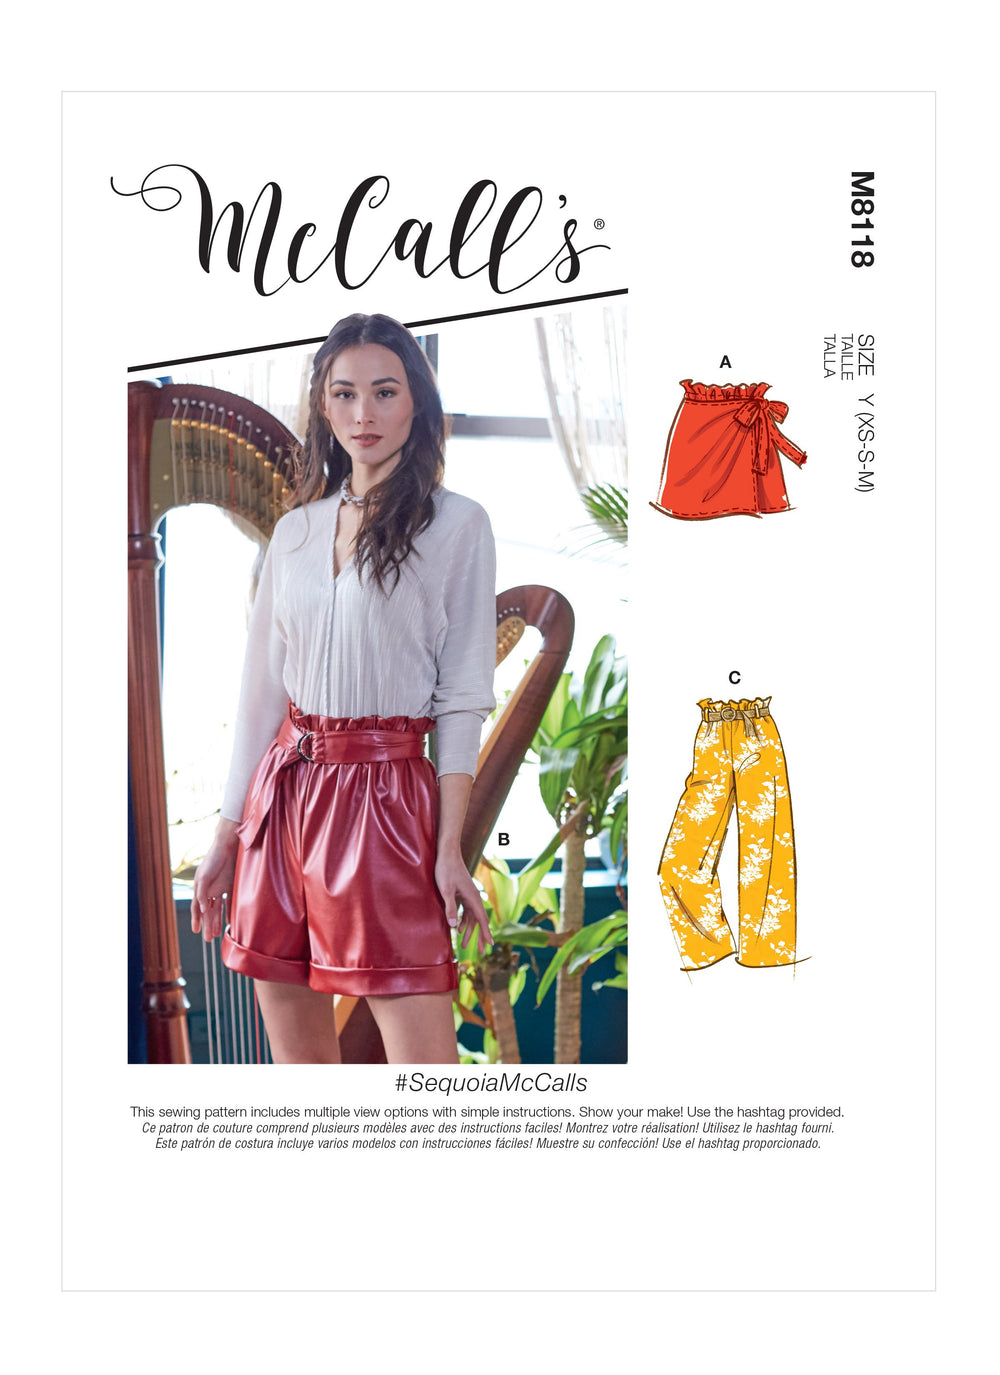 McCall's 8118 Shorts, Pants and Belt sewing pattern #SequoiaMcCalls from Jaycotts Sewing Supplies